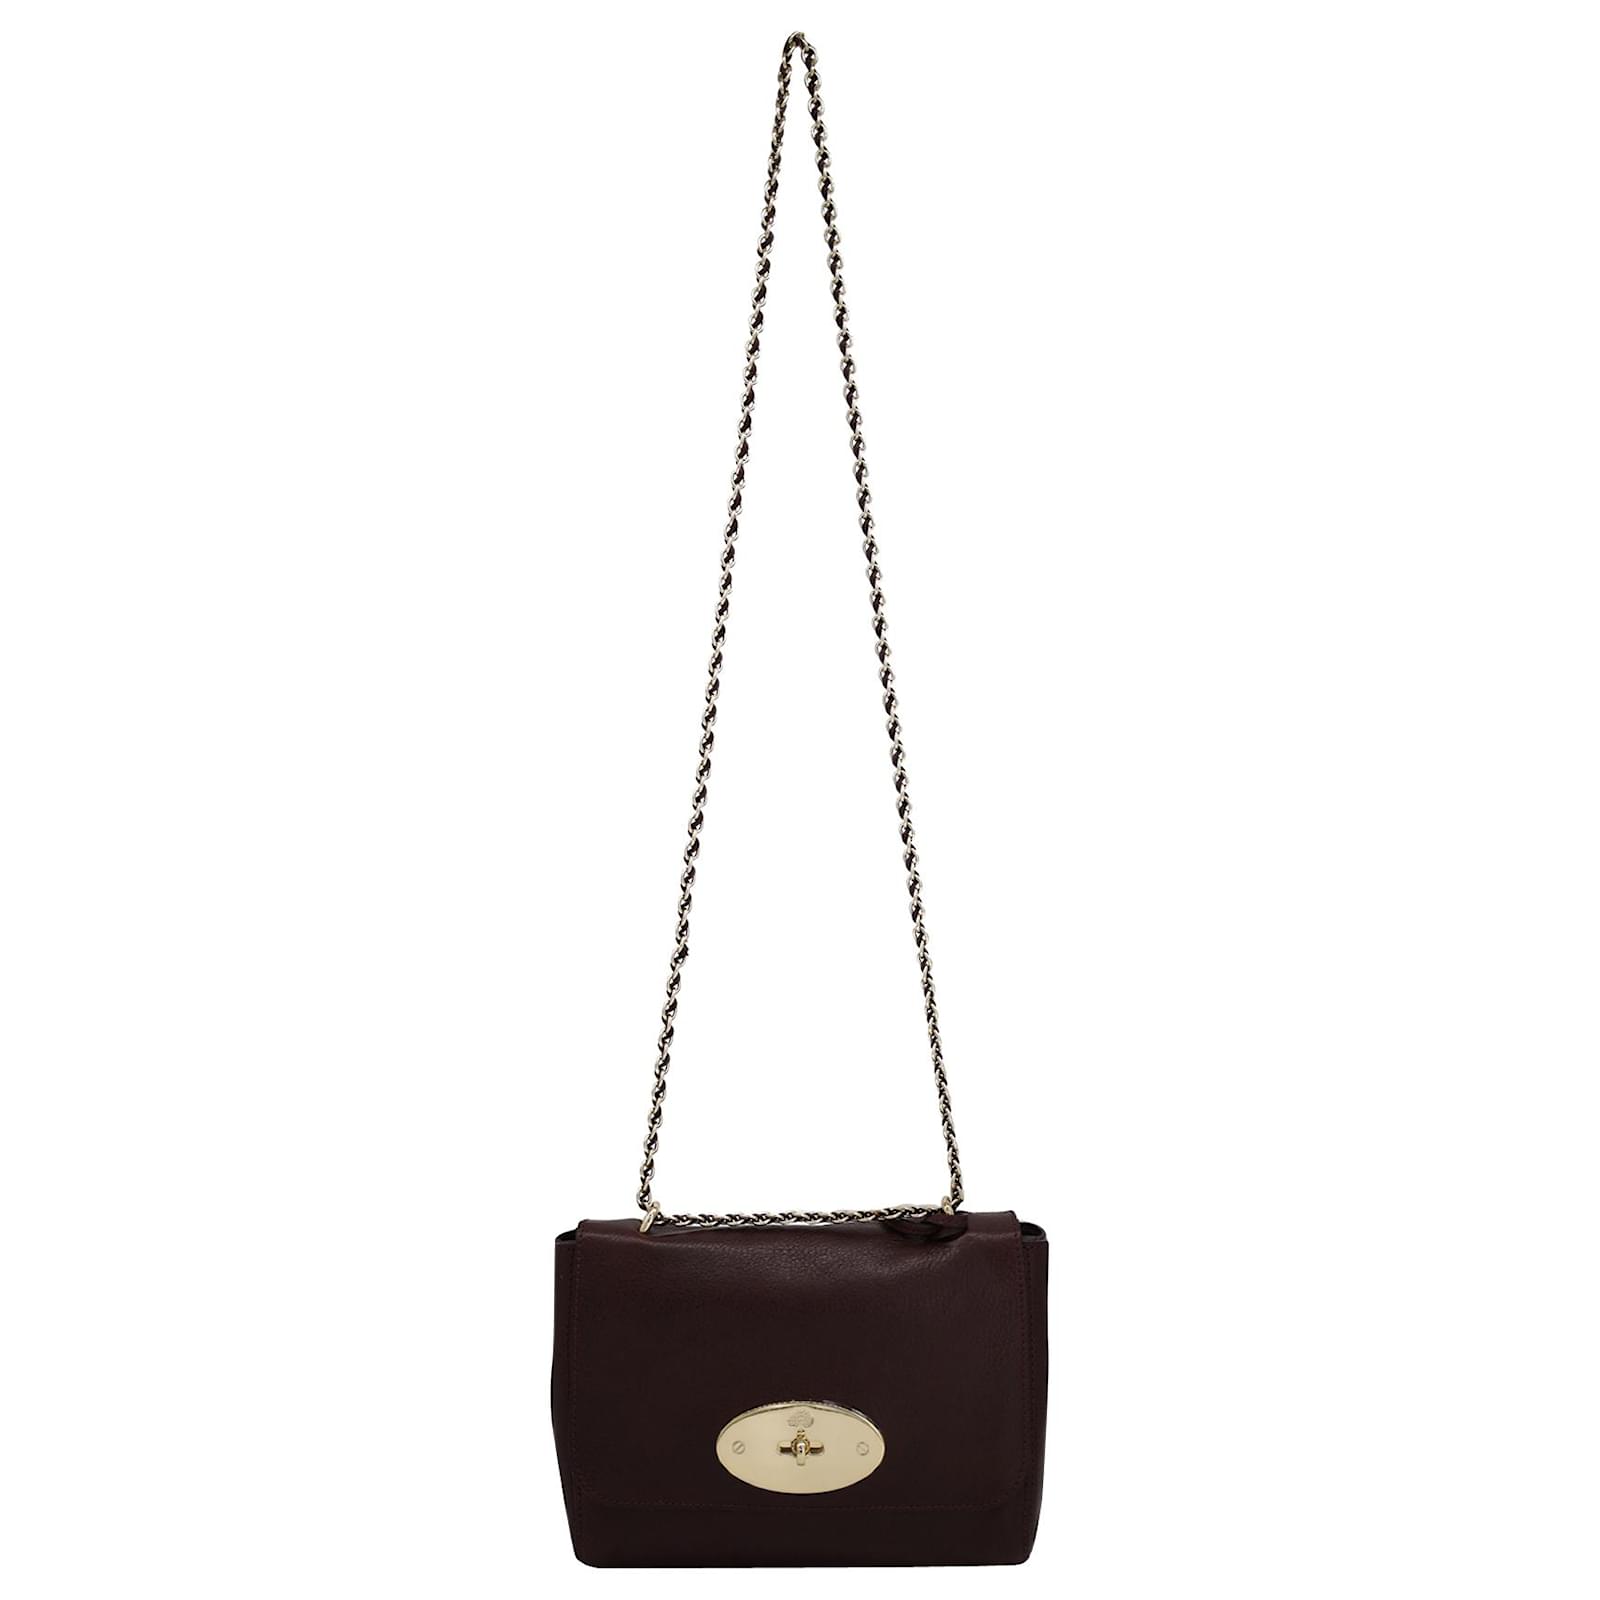 Mulberry Bayswater - New in Oxblood | Handbag Clinic